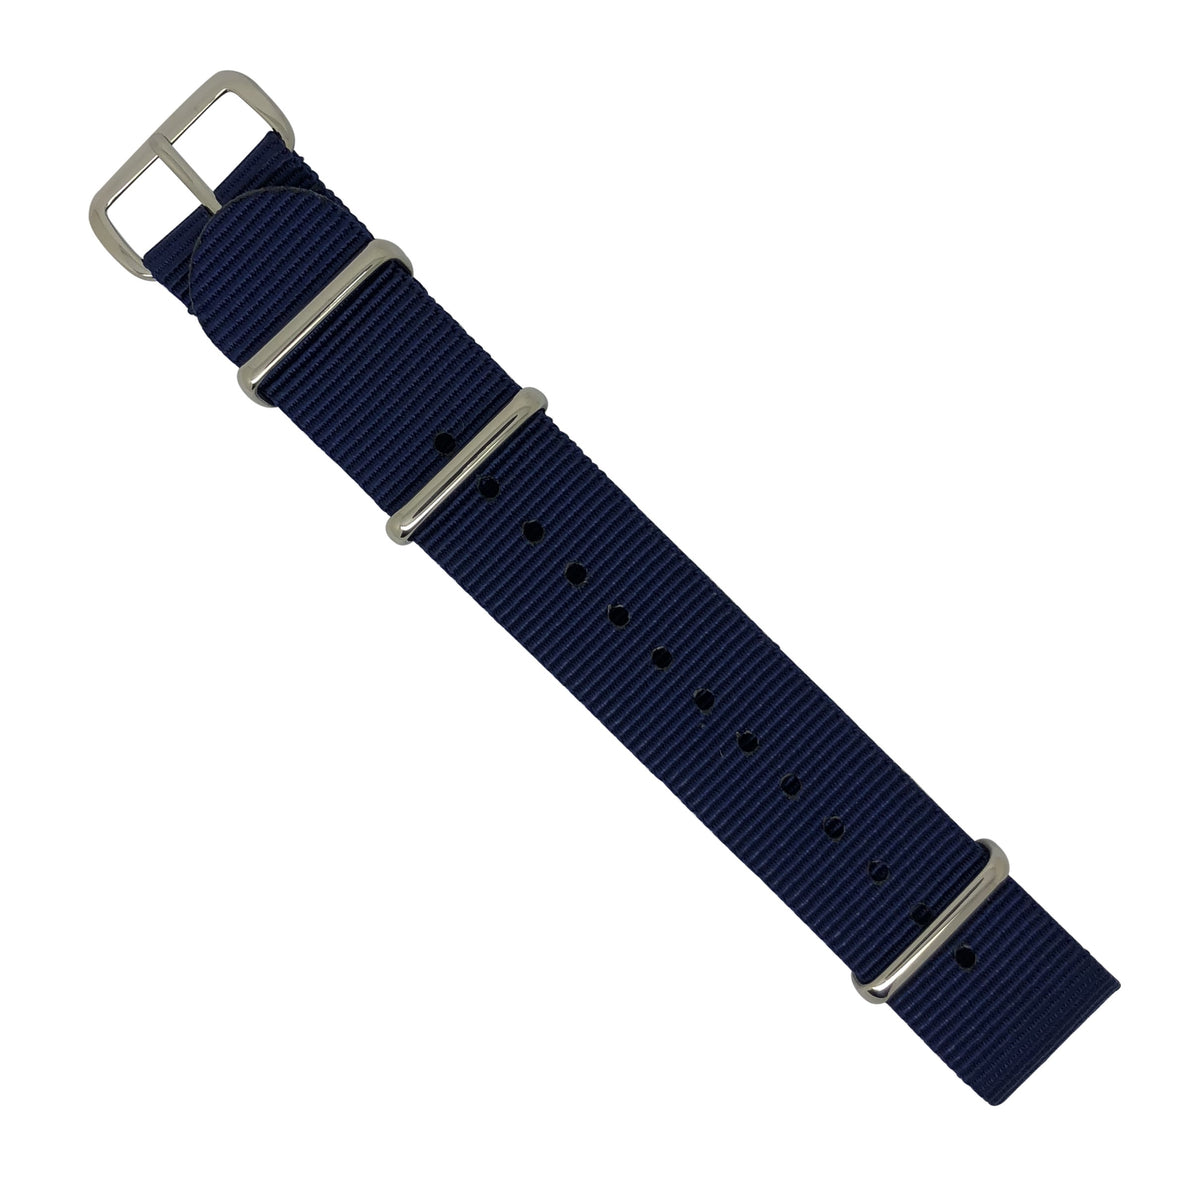 Premium Nato Strap in Navy with Polished Silver Buckle (18mm) - Nomad watch Works